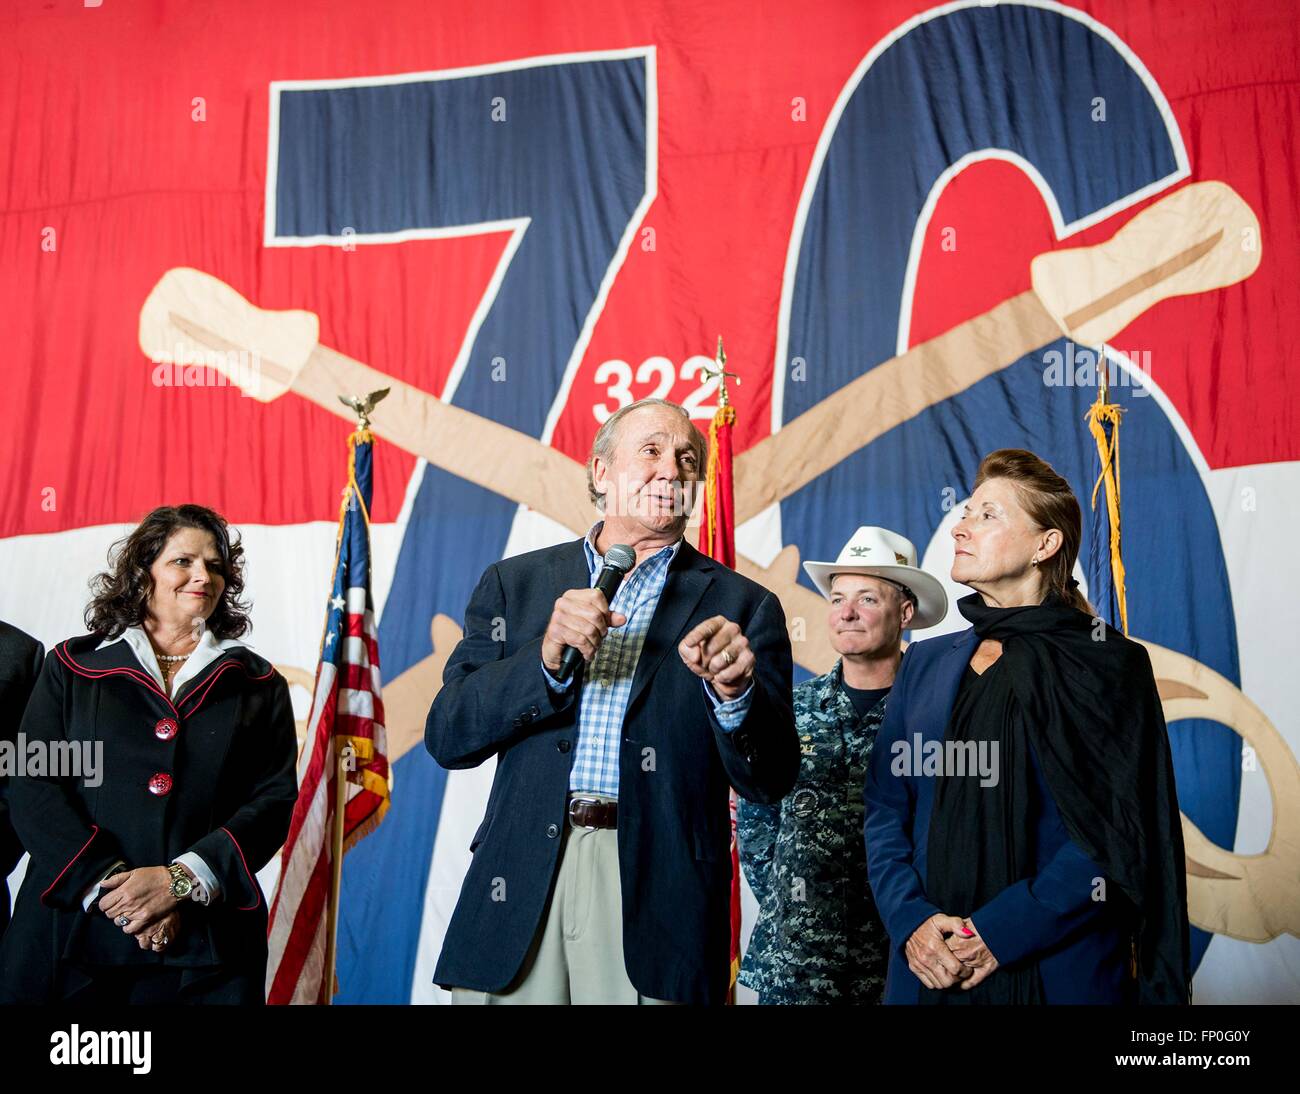 Michael Reagan, son of President Ronald Reagan, addresses Sailors during a visit to the aircraft carrier USS Ronald Reagan March 15, 2016 in Yokosuka, Japan. Reagan awarded Reagan Legacy Foundation scholarships to 25 Sailors and their families. Stock Photo